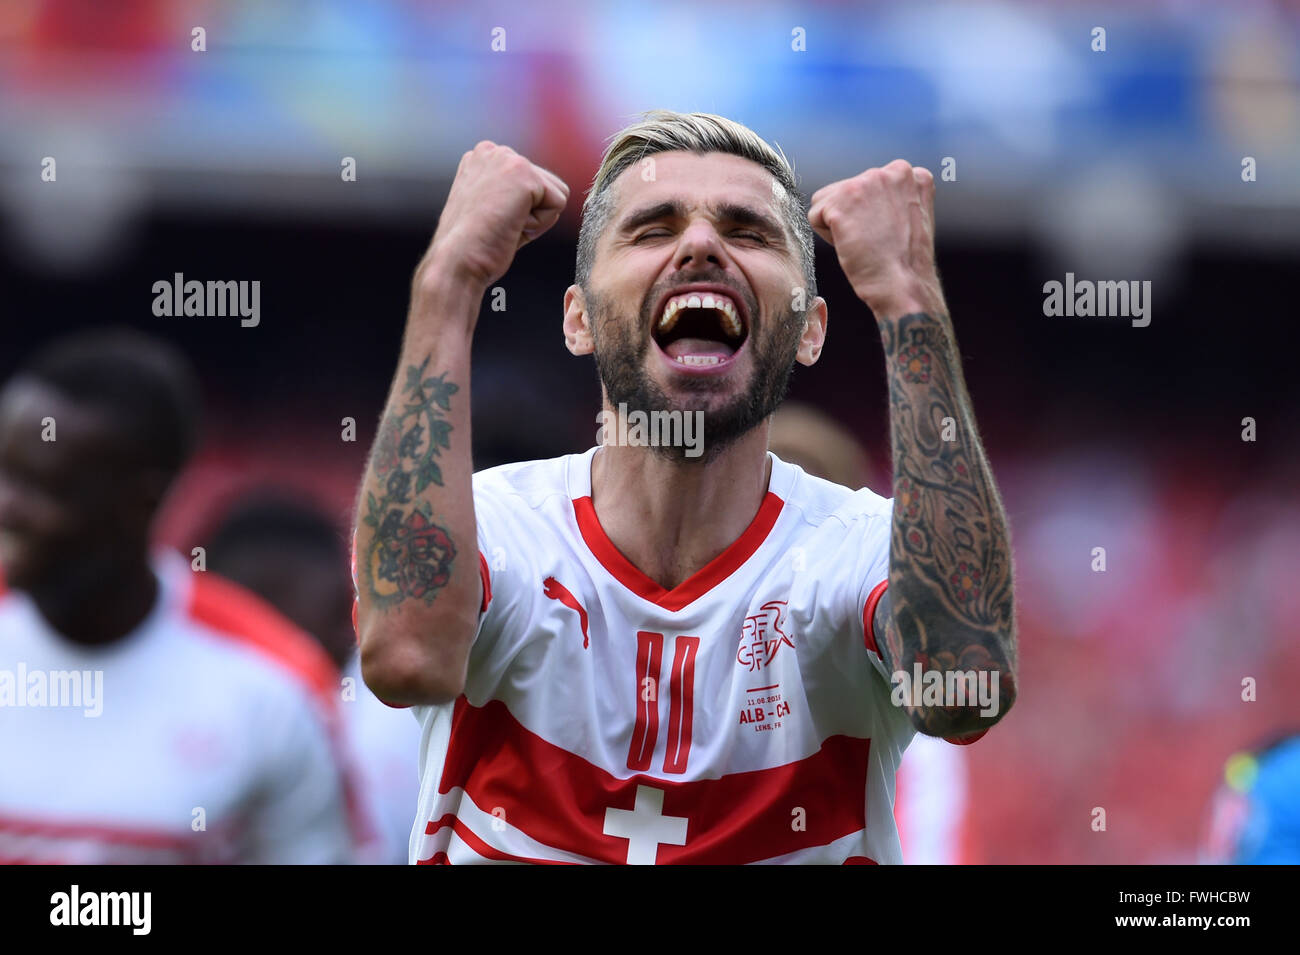 Lens, France. 11th June, 2016. Valon Behrami (SUI) Football/Soccer : Valon Behrami of Switzerland celebrates after winning the UEFA EURO 2016 Group A match between Albania 0-1 Switzerland at Stade Bollaert-Delelis in Lens, France . © aicfoto/AFLO/Alamy Live News Stock Photo